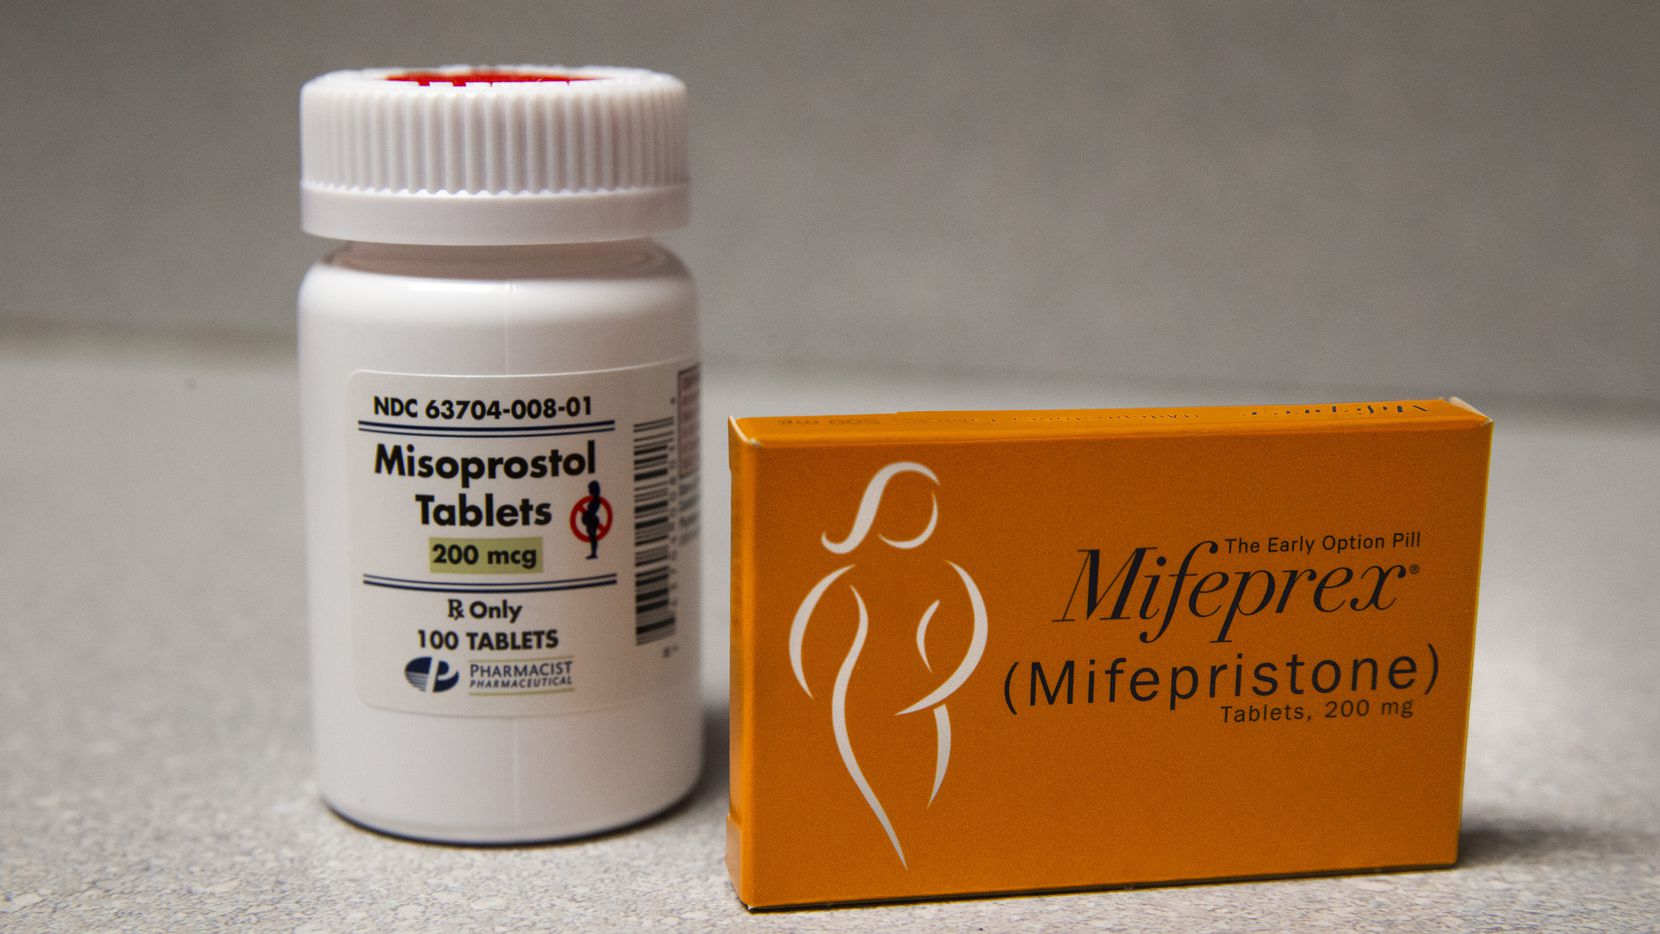 A bottle of misoprostol and a box of Mifeprex (mifespristone) medications at the Whole Women's Health clinic in Fort Worth, Texas, on Thursday, November 21, 2019. These medications can terminate a pregnancy if taken together within 10 weeks of a person's last menstrual period. Federal Drug Administration regulations require mifepristone to be dispensed directly by a qualified health care provider.